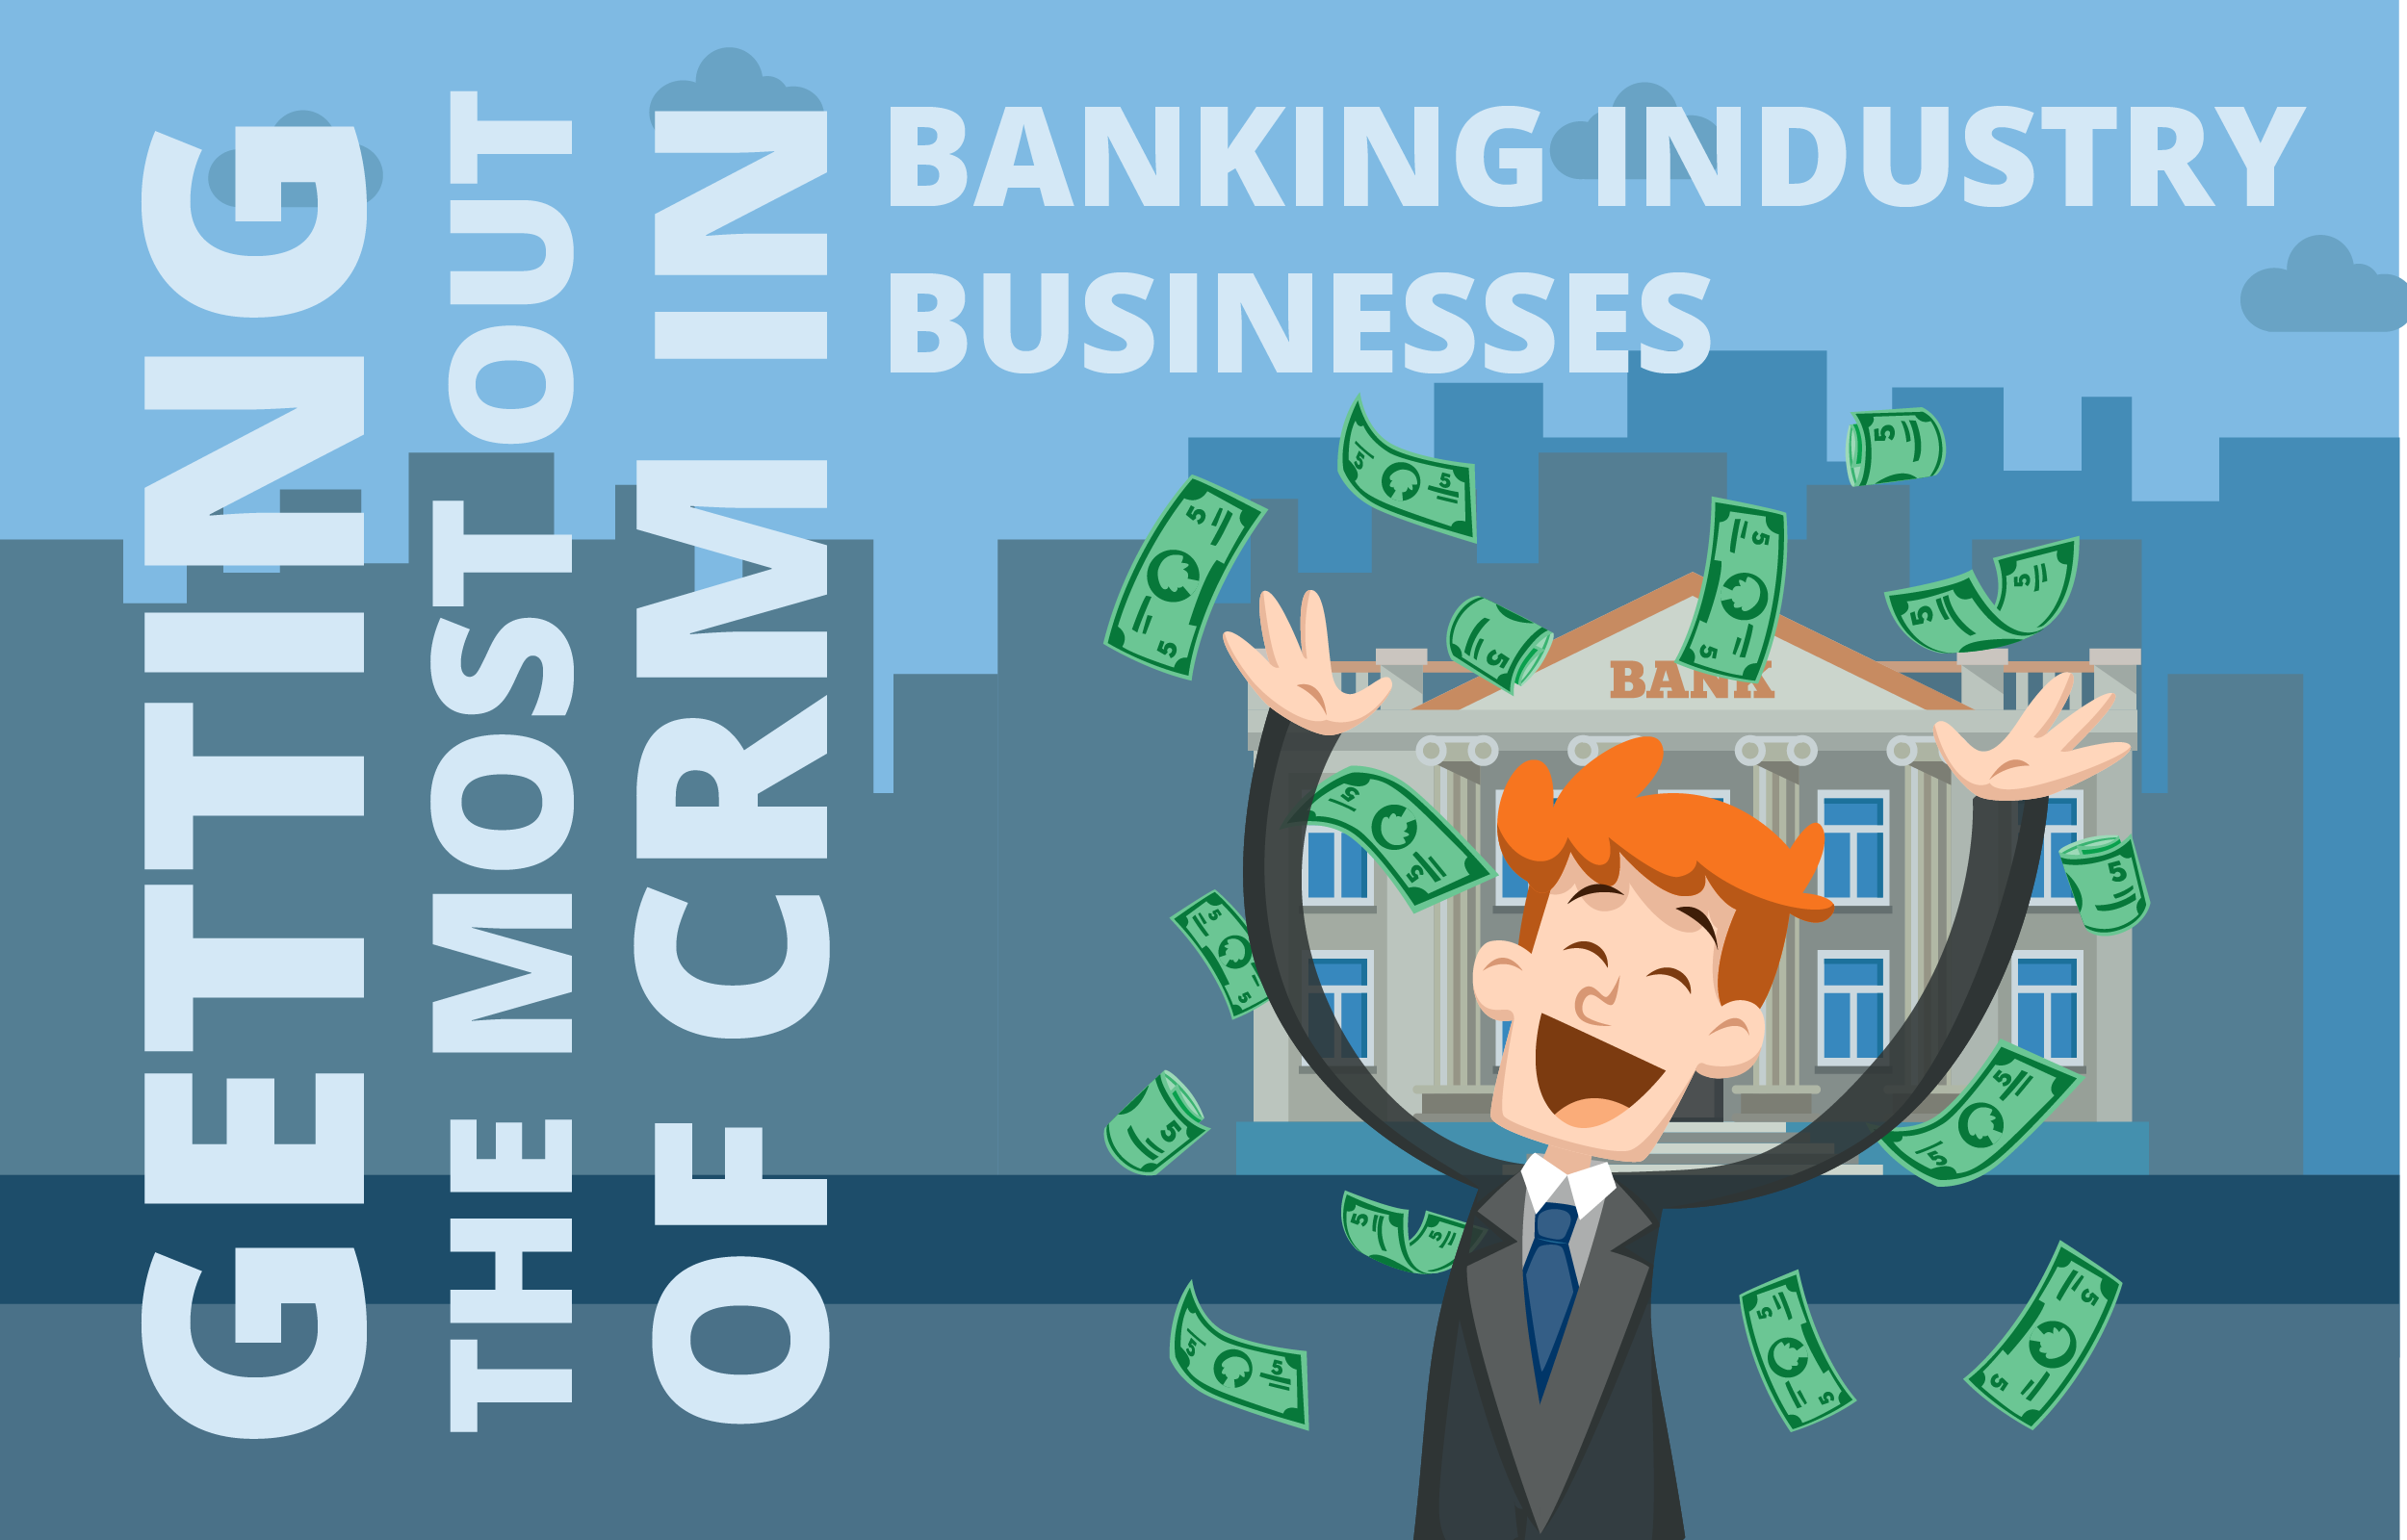 Getting the most out of CRM in Banking Industry Businesses